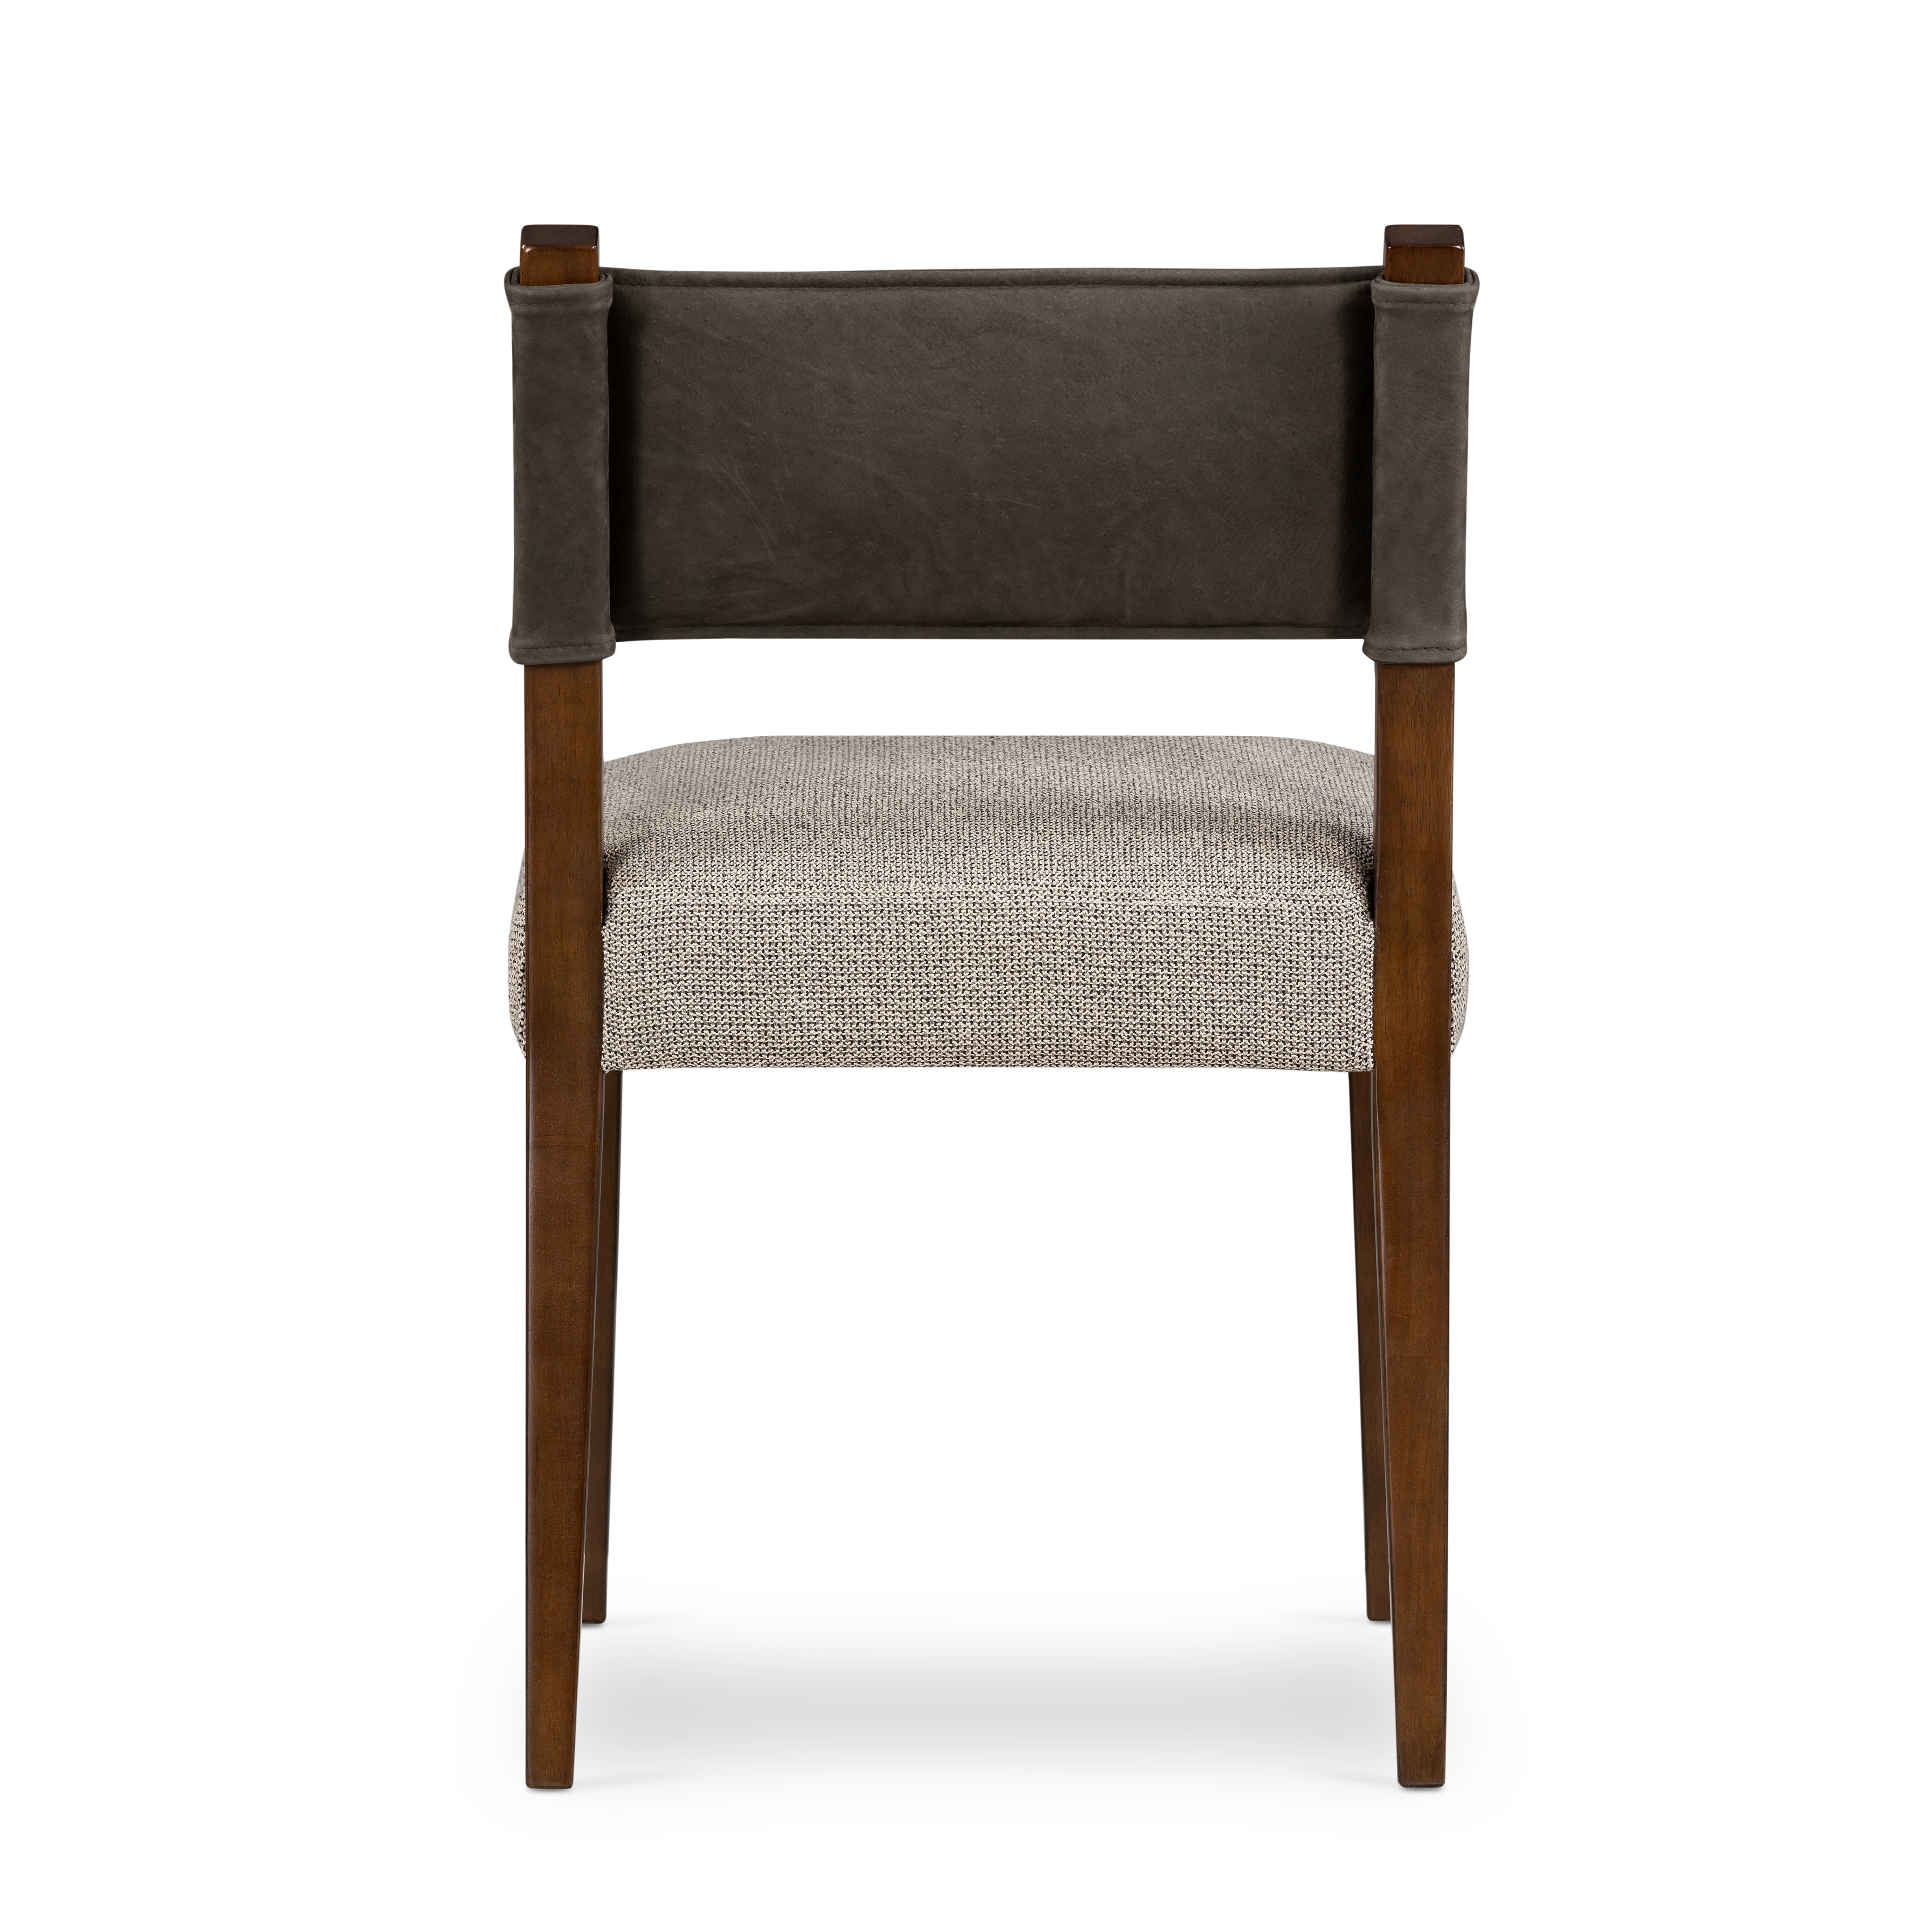 Ferris Dining Chair-Nubuck Charcoal - Image 5